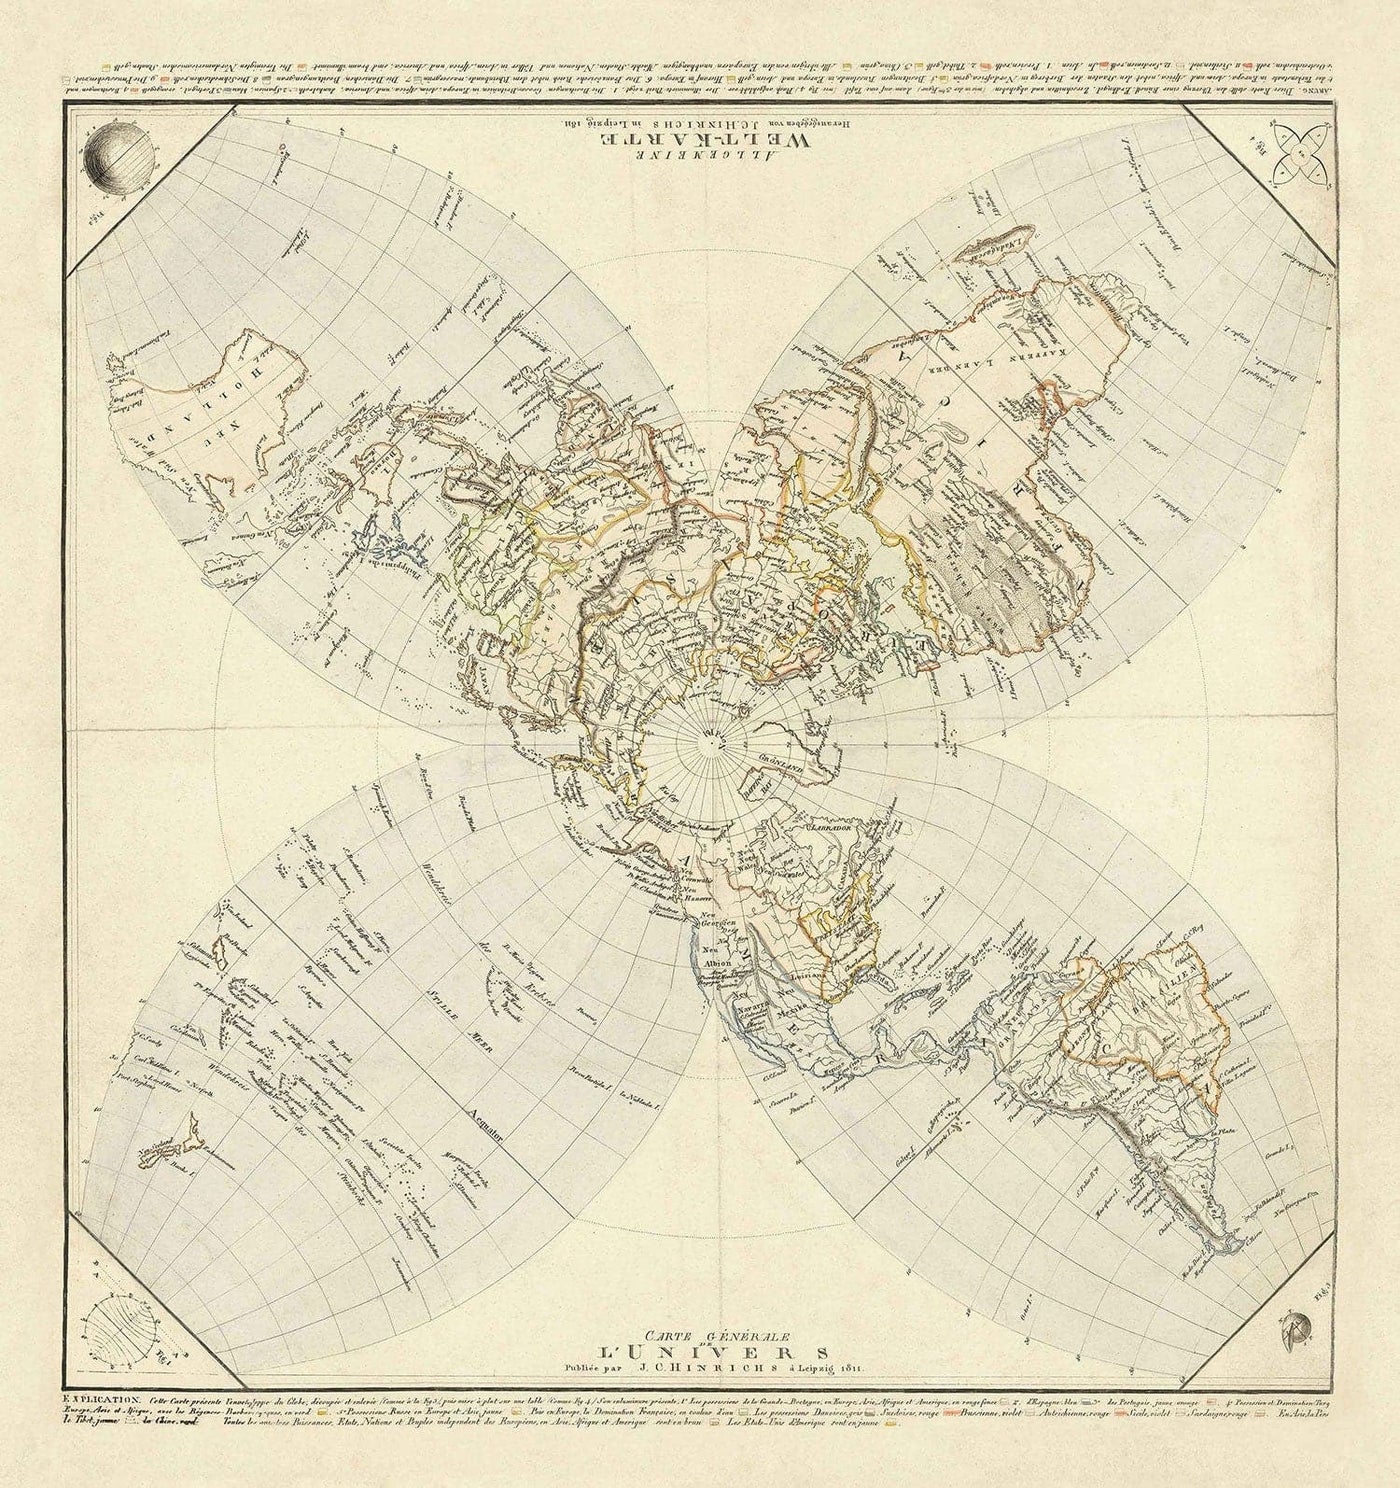 Old Flat Earth Map, 1811 by JC Hinrichs - German, French World Map - Interesting Colonial Atlas Chart